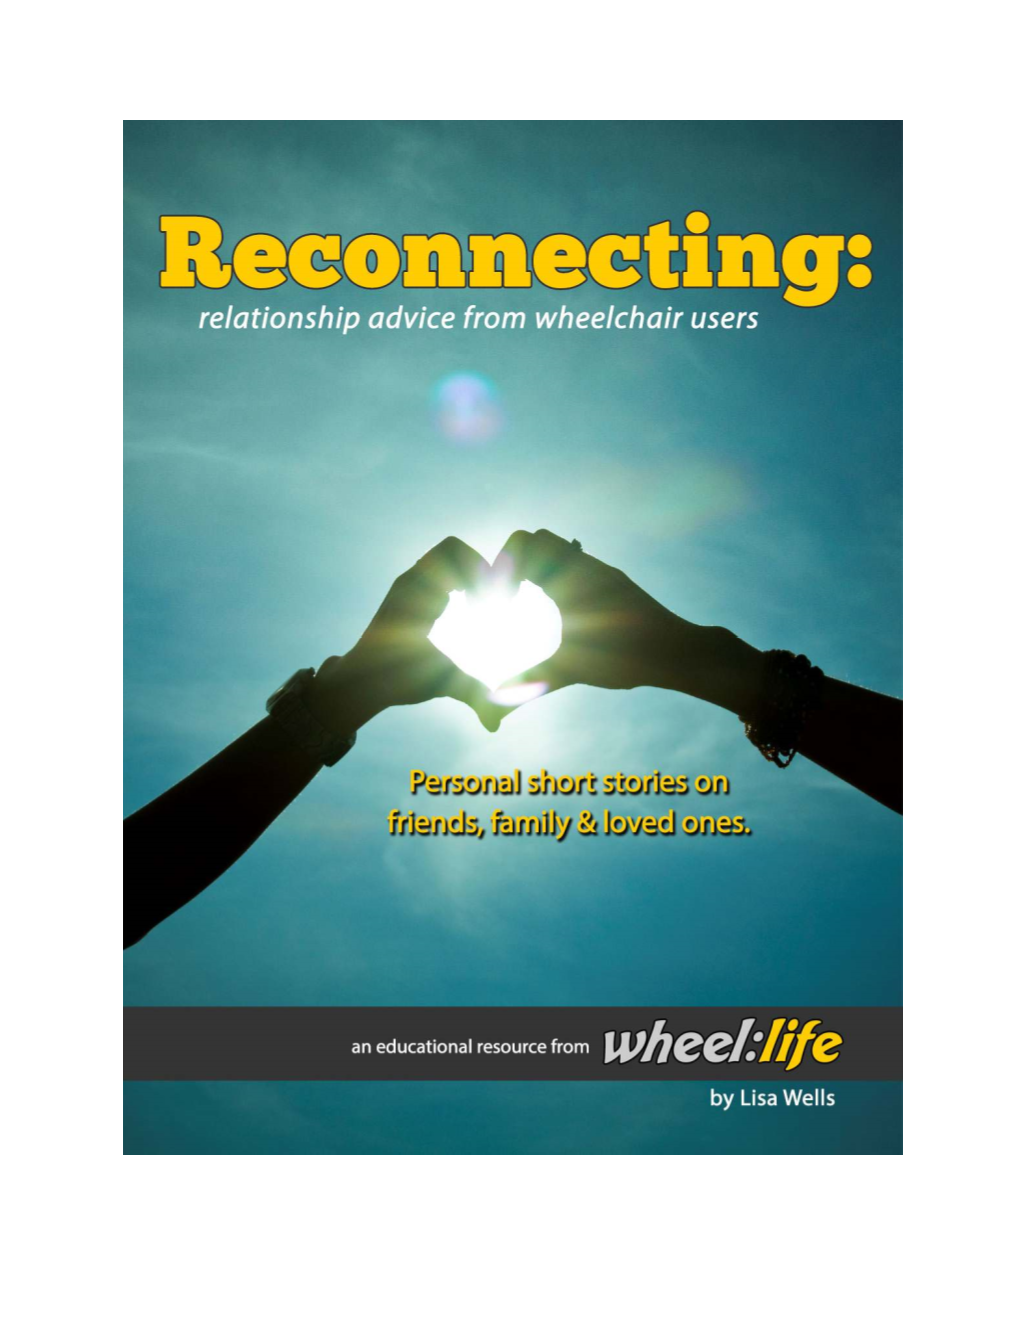 Download Free Book: Reconnecting: Relationship Advice for Wheelchair